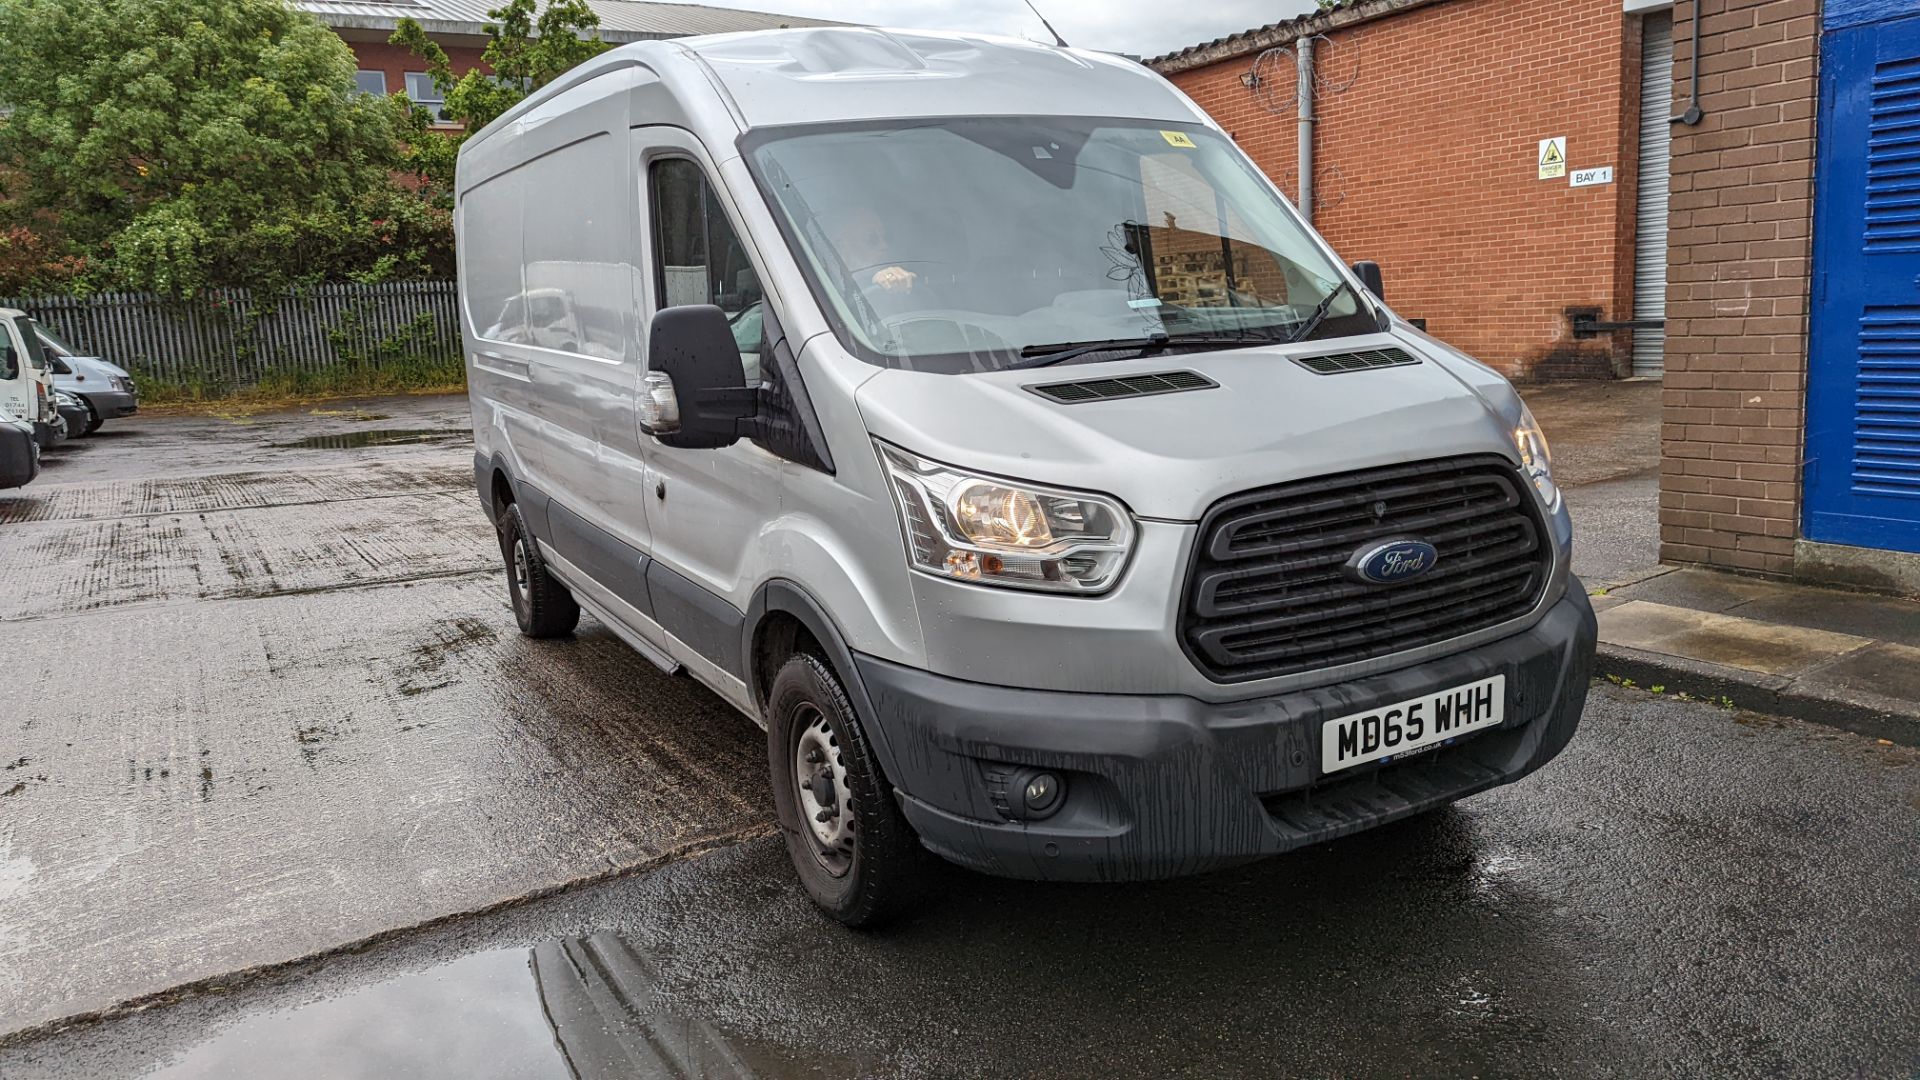 MD65 WHH Ford Transit 350, 6-speed manual gearbox, 2198cc diesel engine, 5981mm x 2550mm. Colour: Si - Image 3 of 51